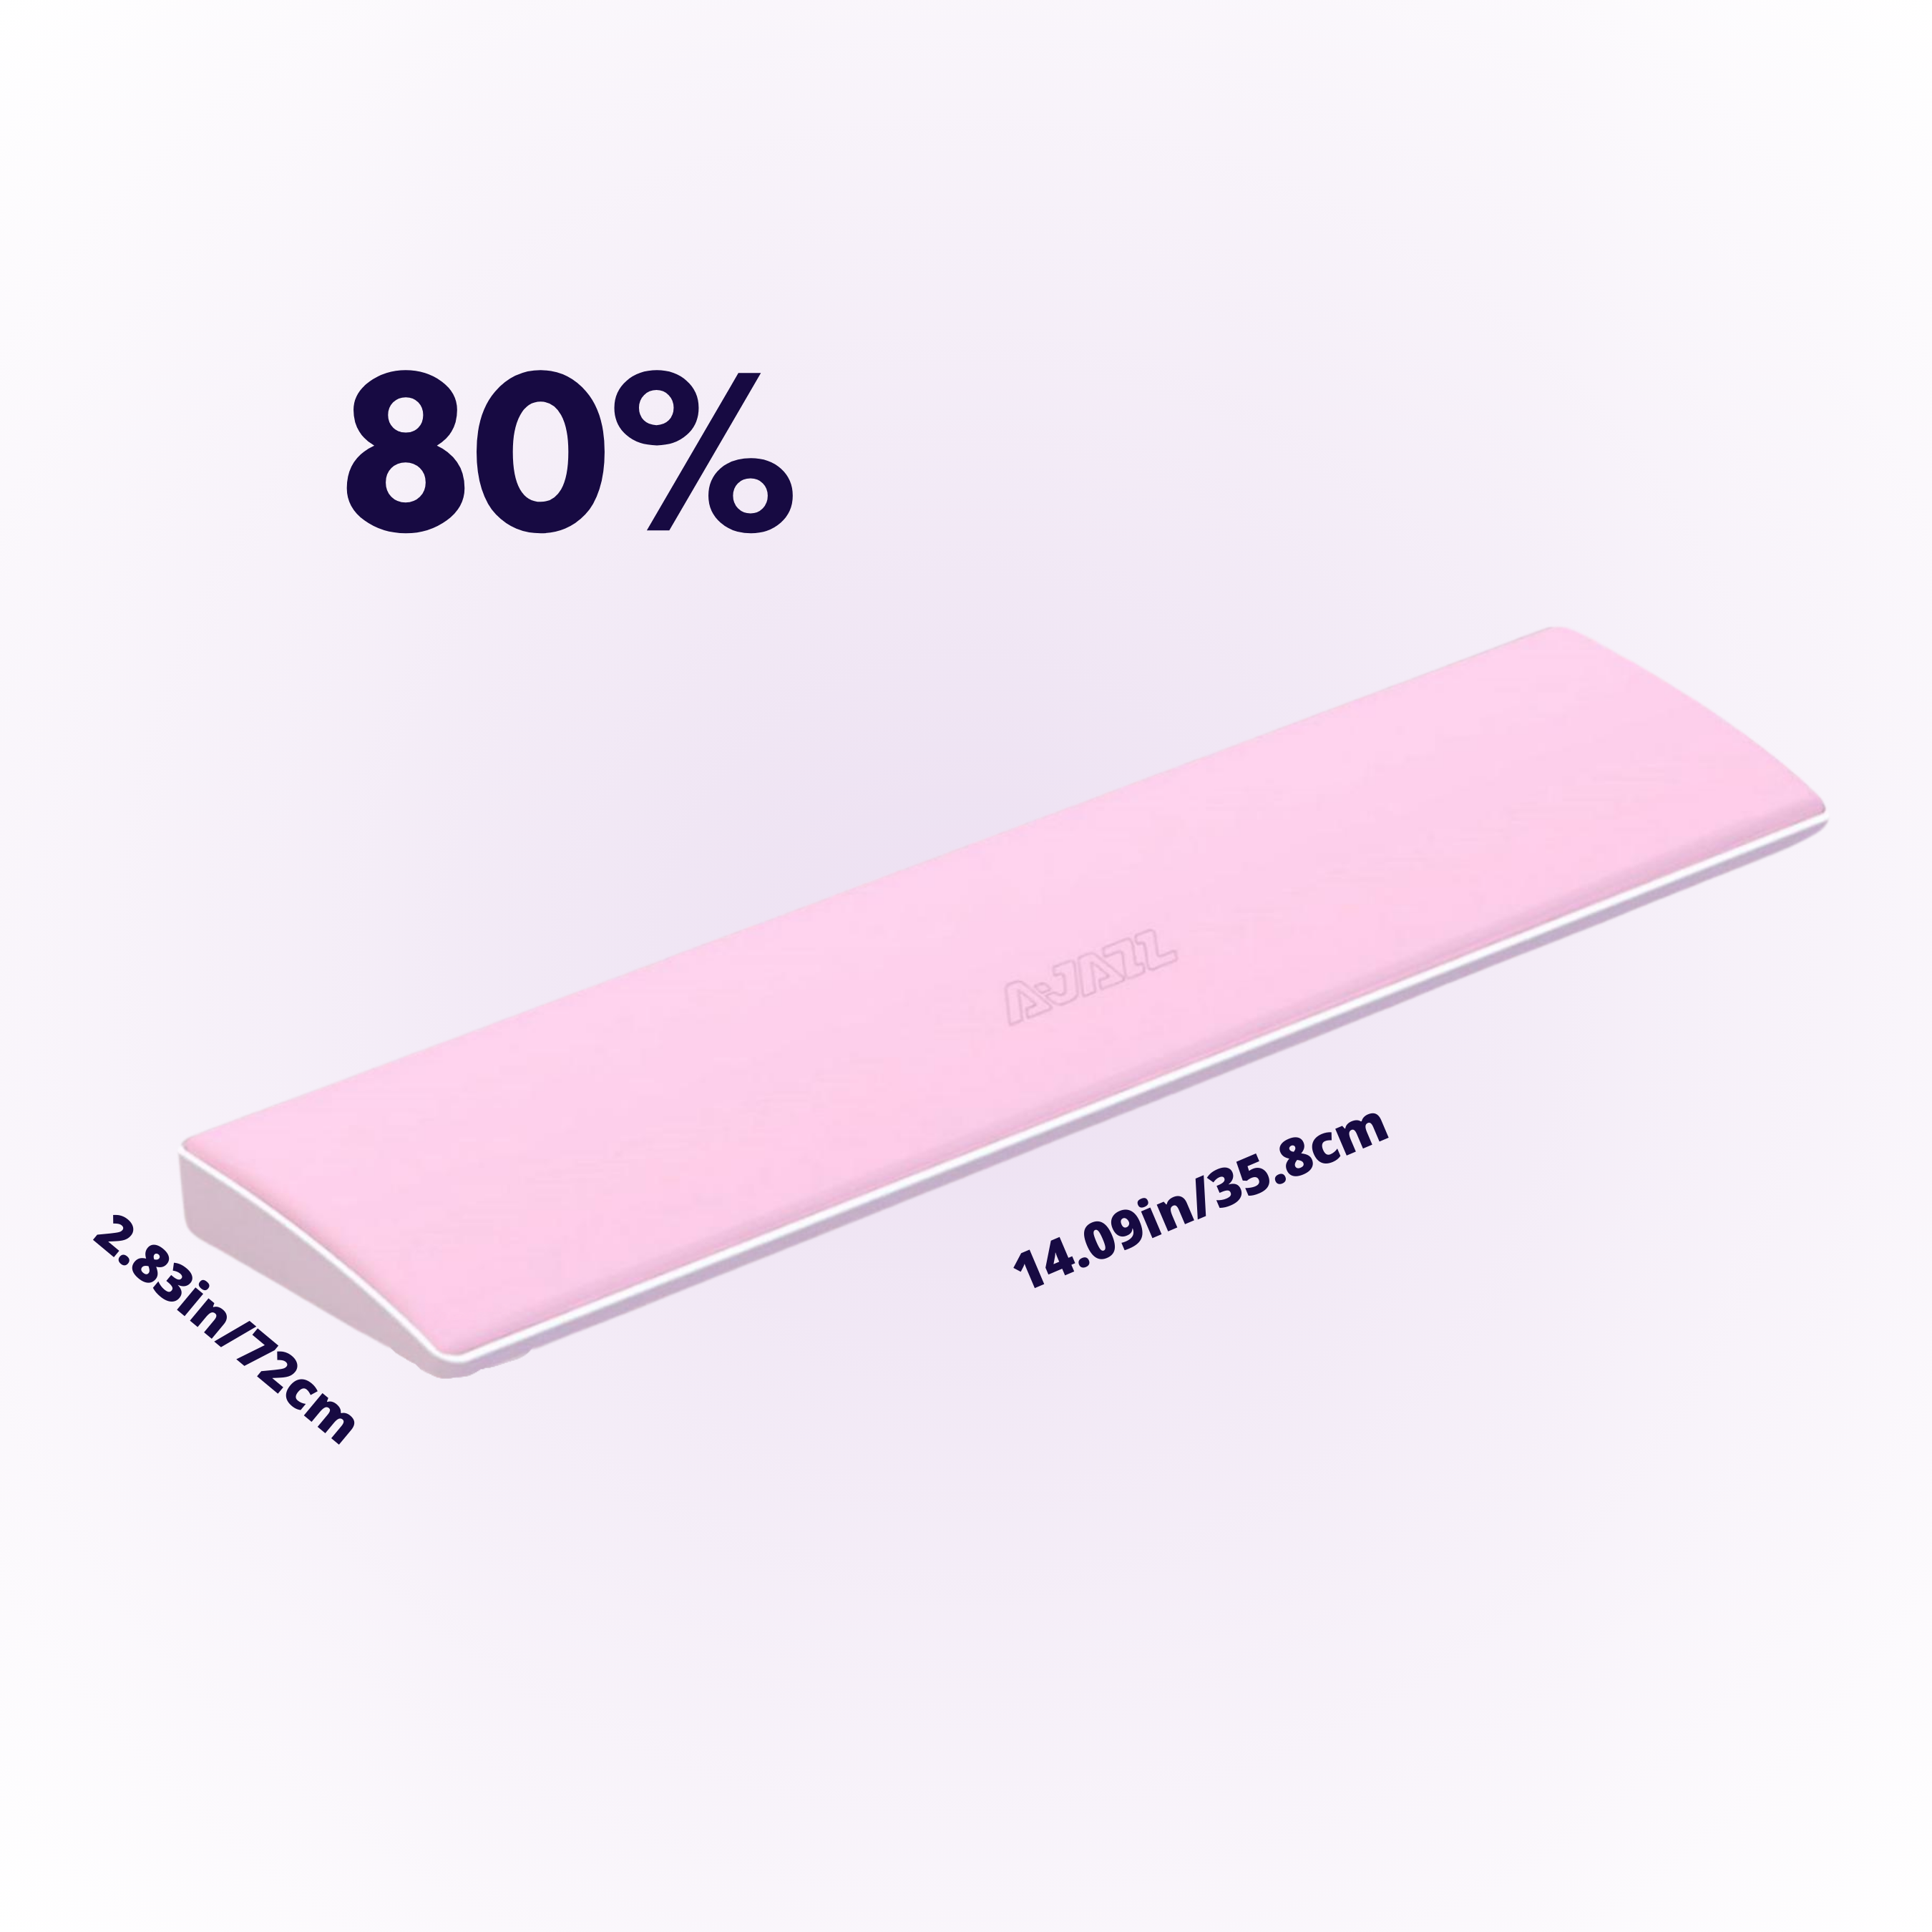 80% mechanical keyboard pink wrist rest with a white base view from and angle